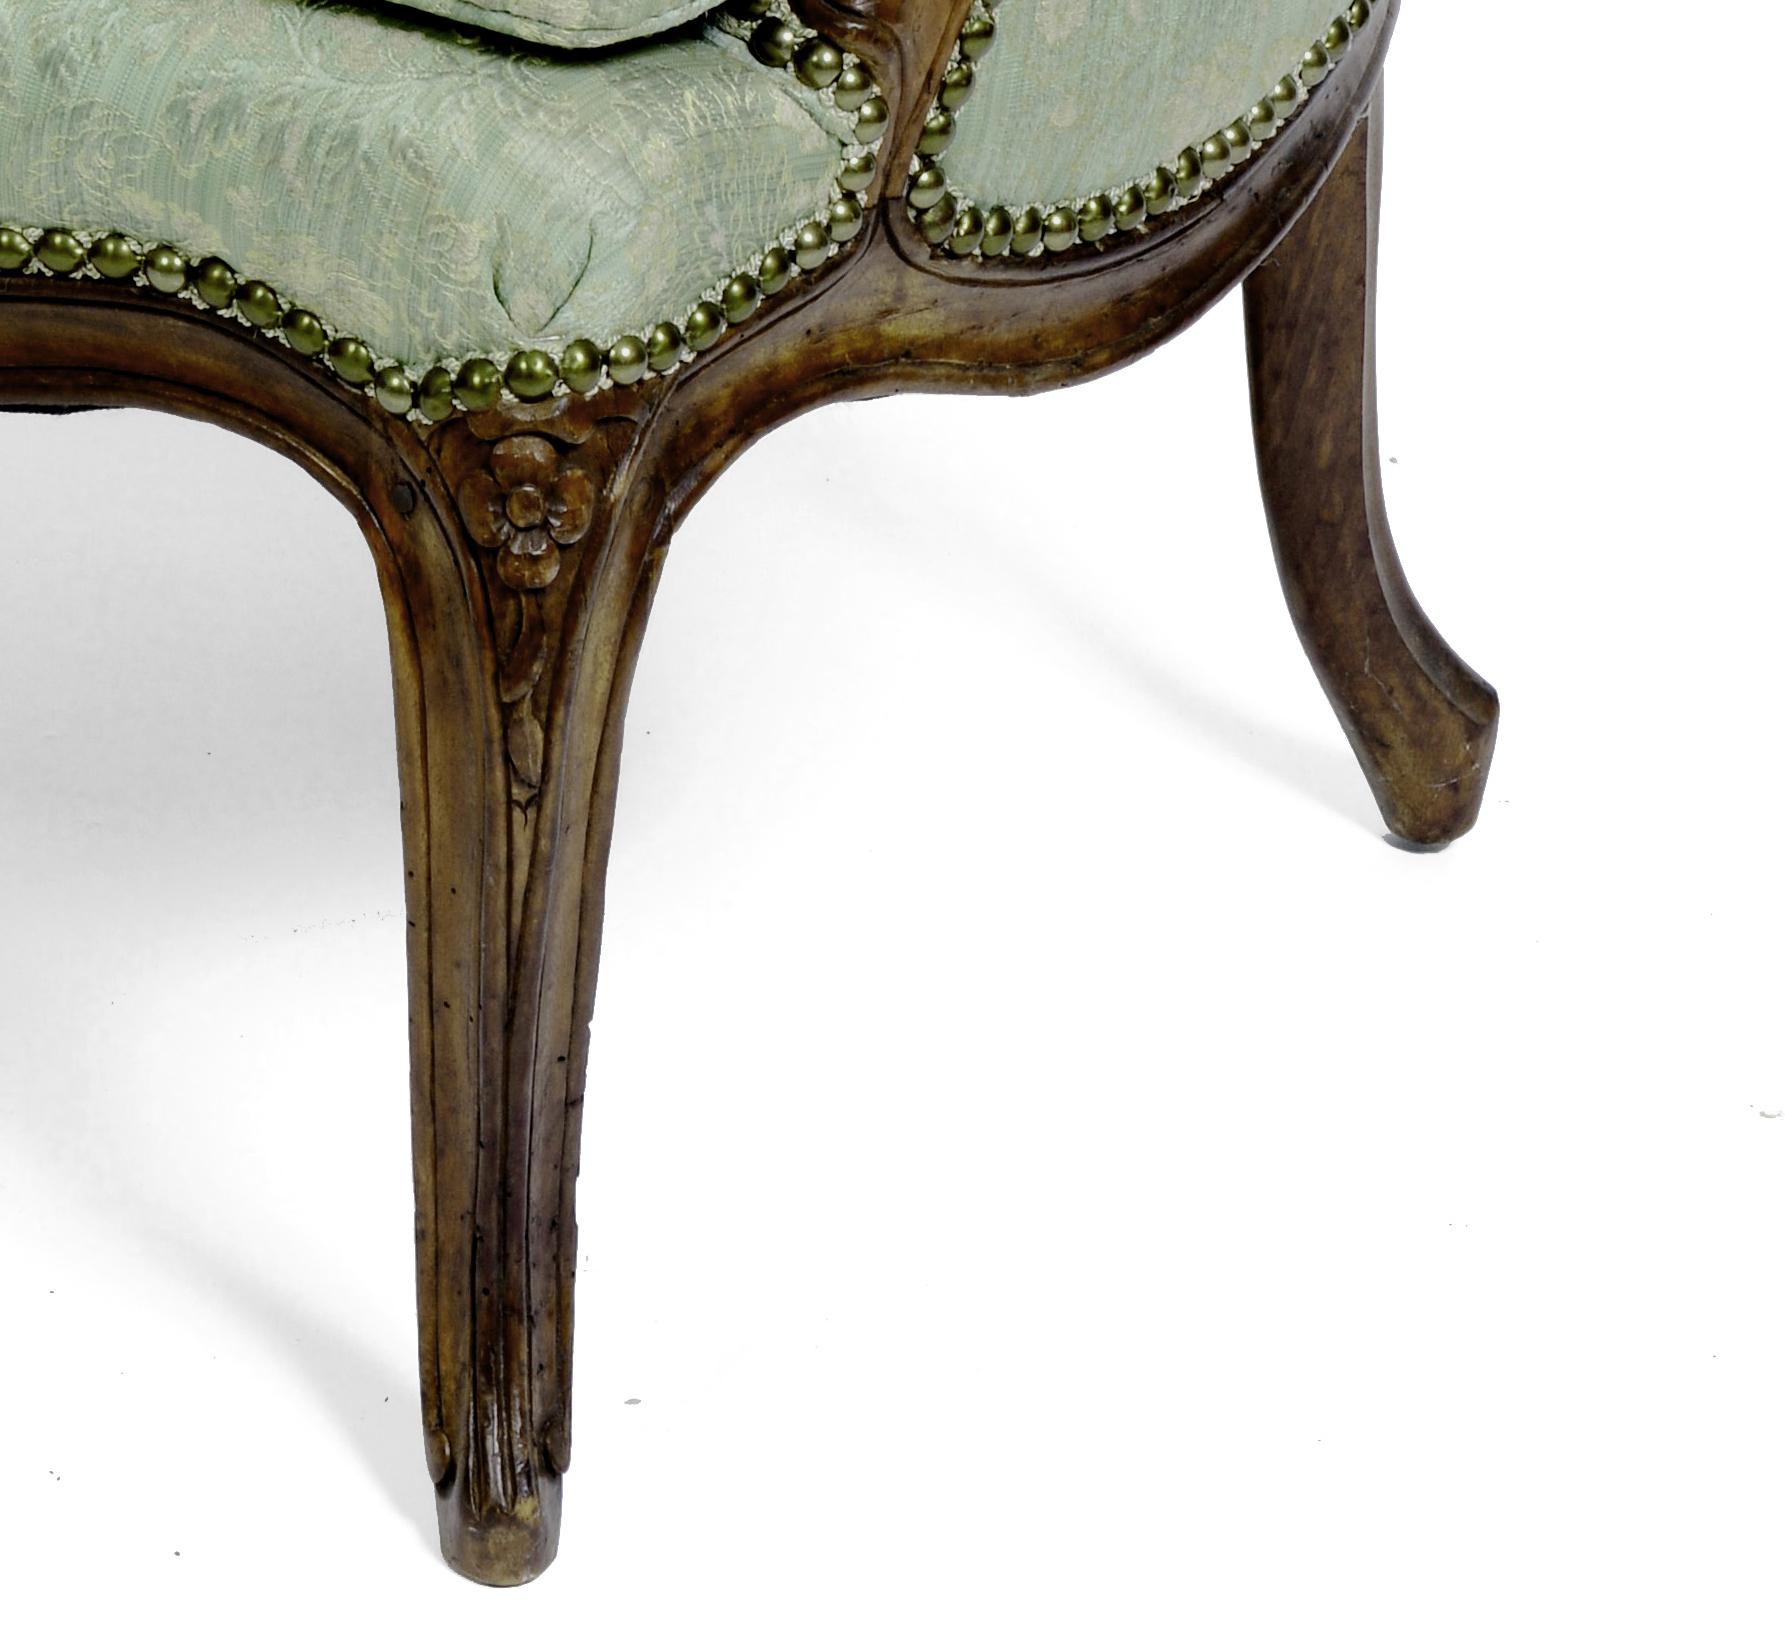 This graceful French bergère is made of floral carved walnut with a curved back and apron. The chair has a generously scaled seat with a tailored loose seat cushion and stands on carved cabriolet legs. A comfortable and stylish chair for any room